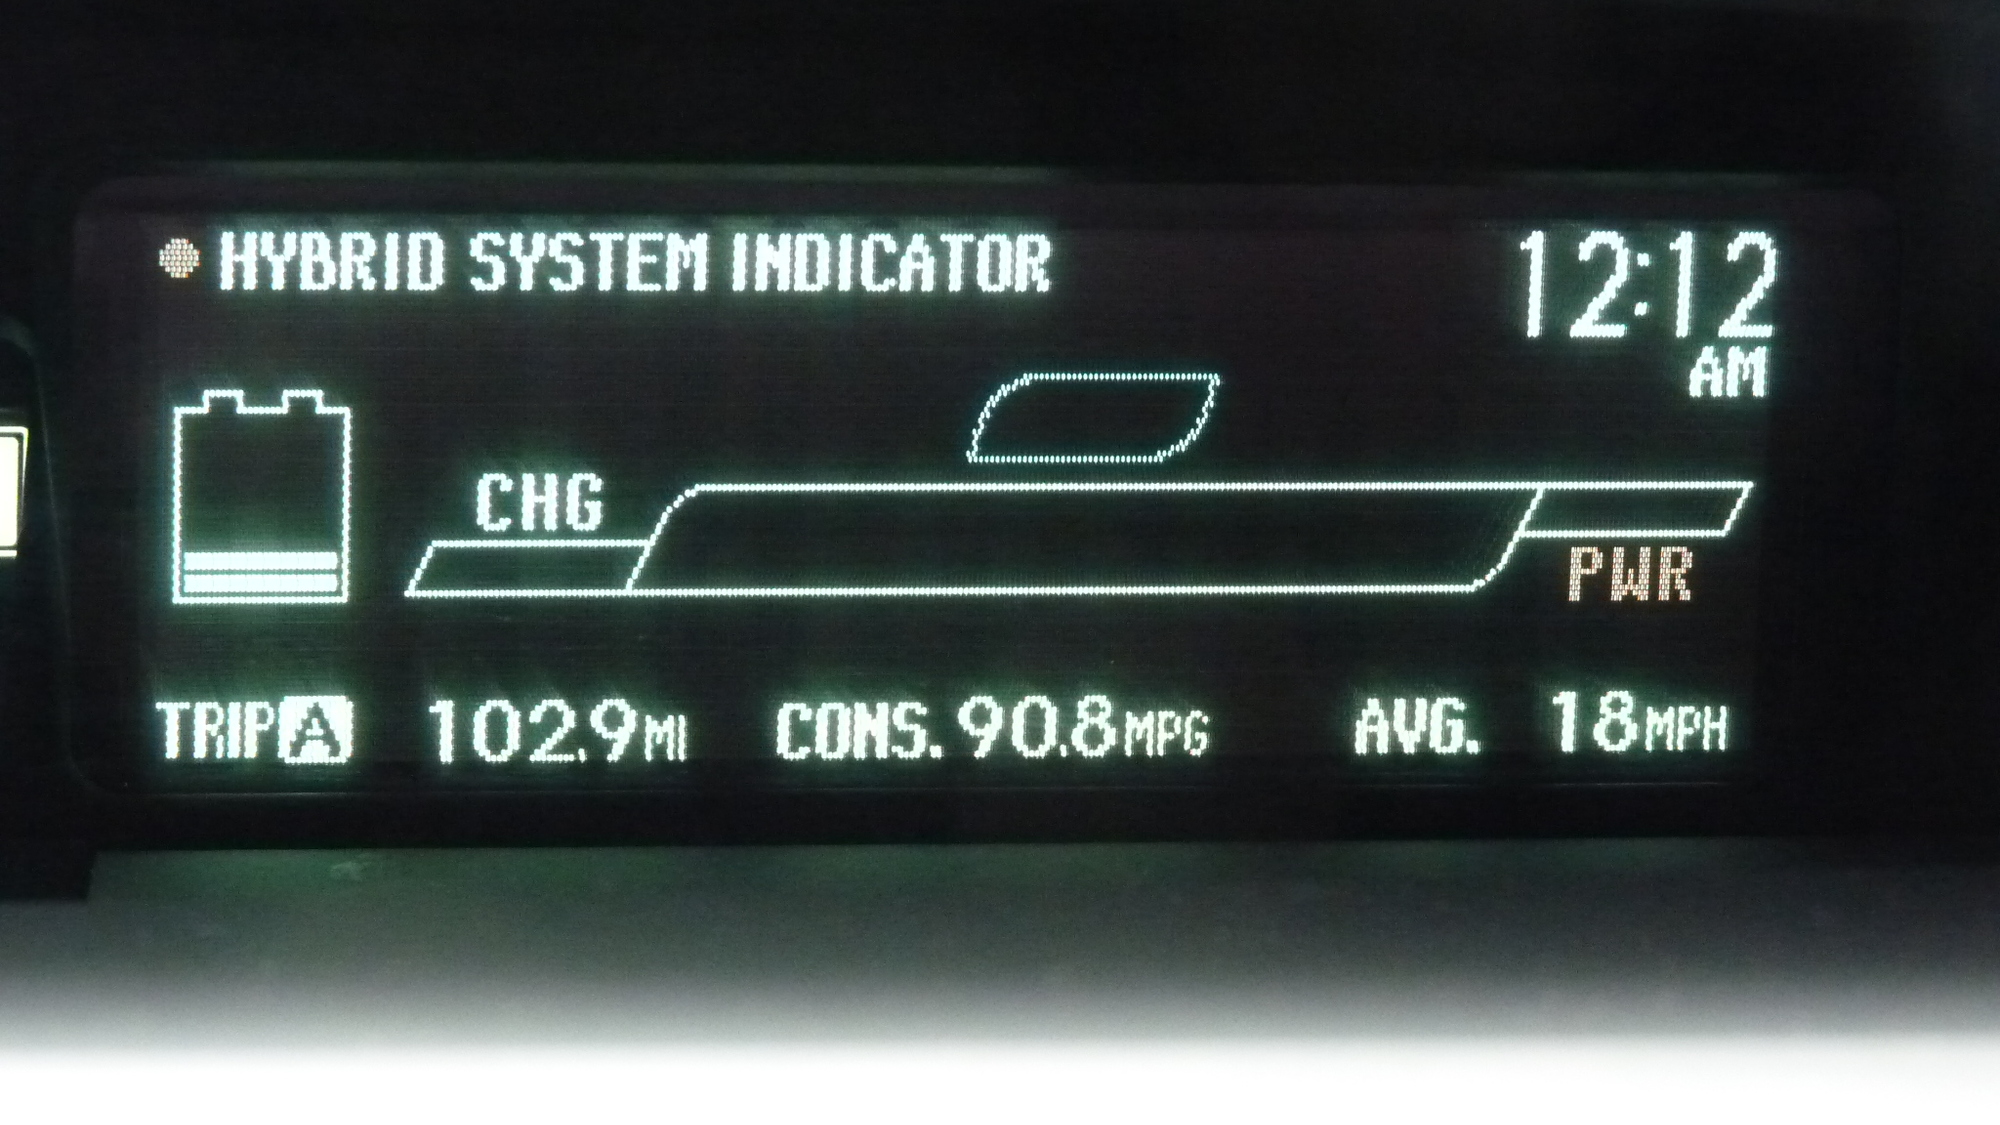 2012 Toyota Prius Plug-In Drive  -  March 2011